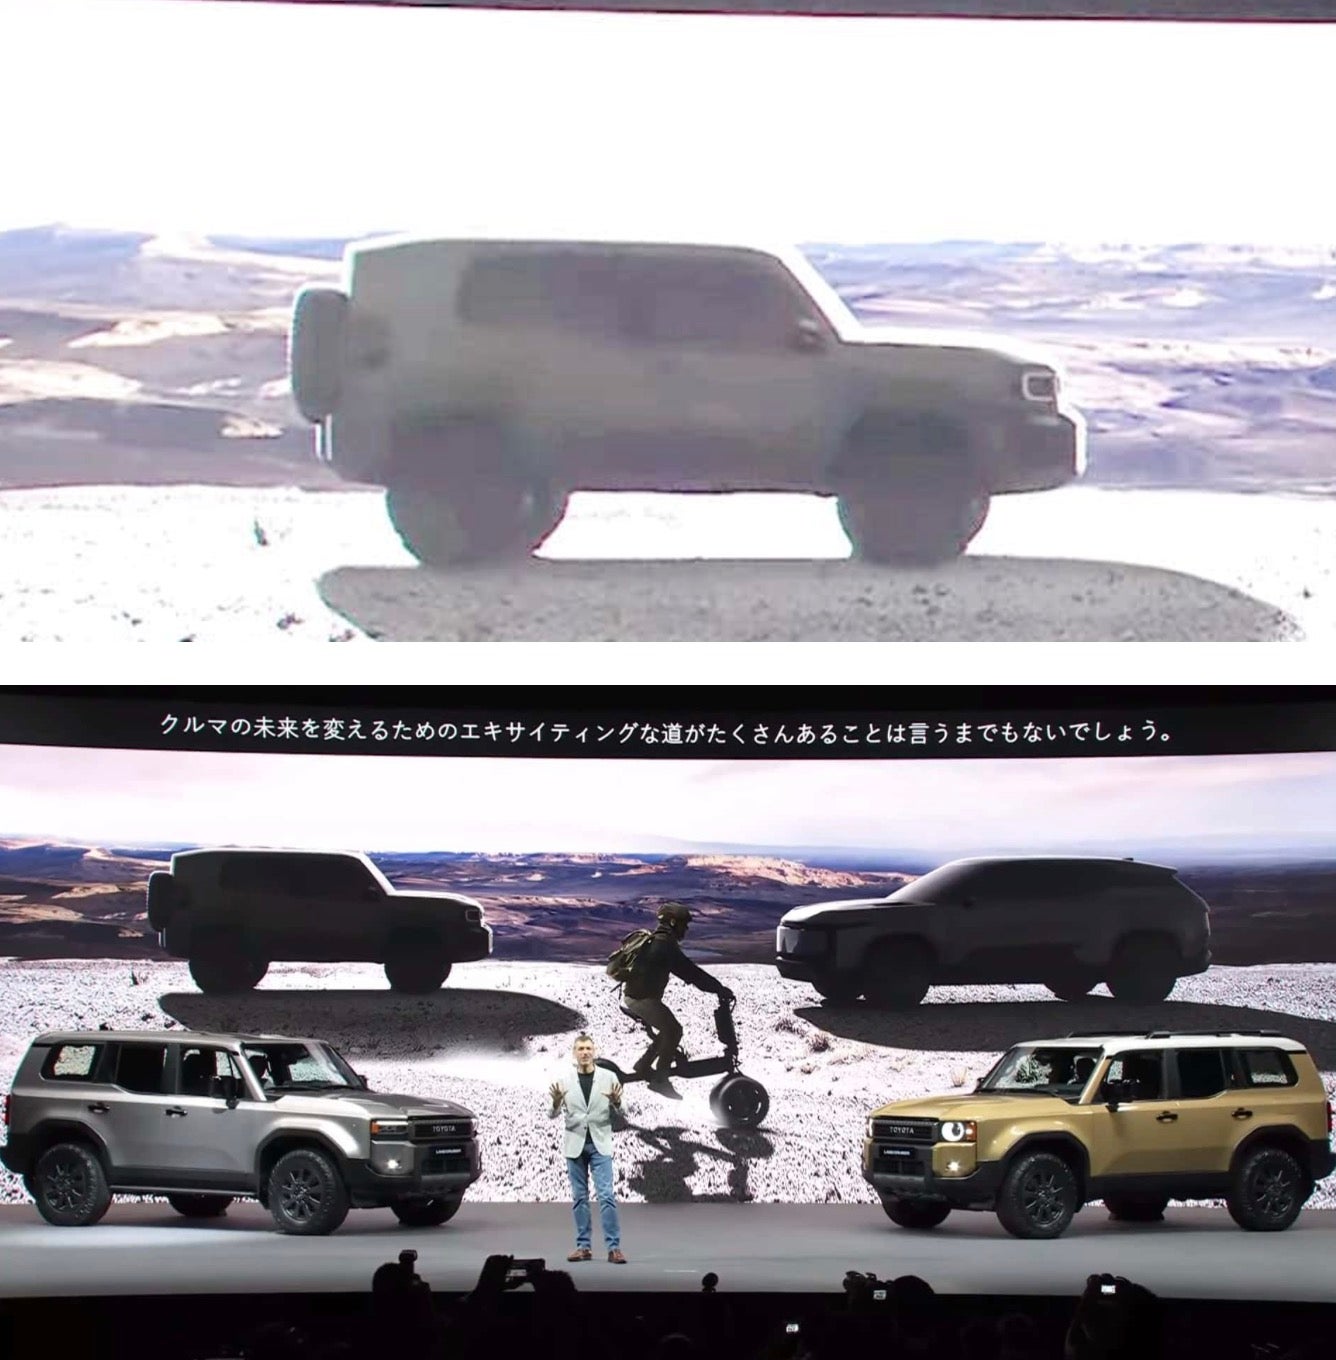 Two Toyota Land Cruisers parked on stage